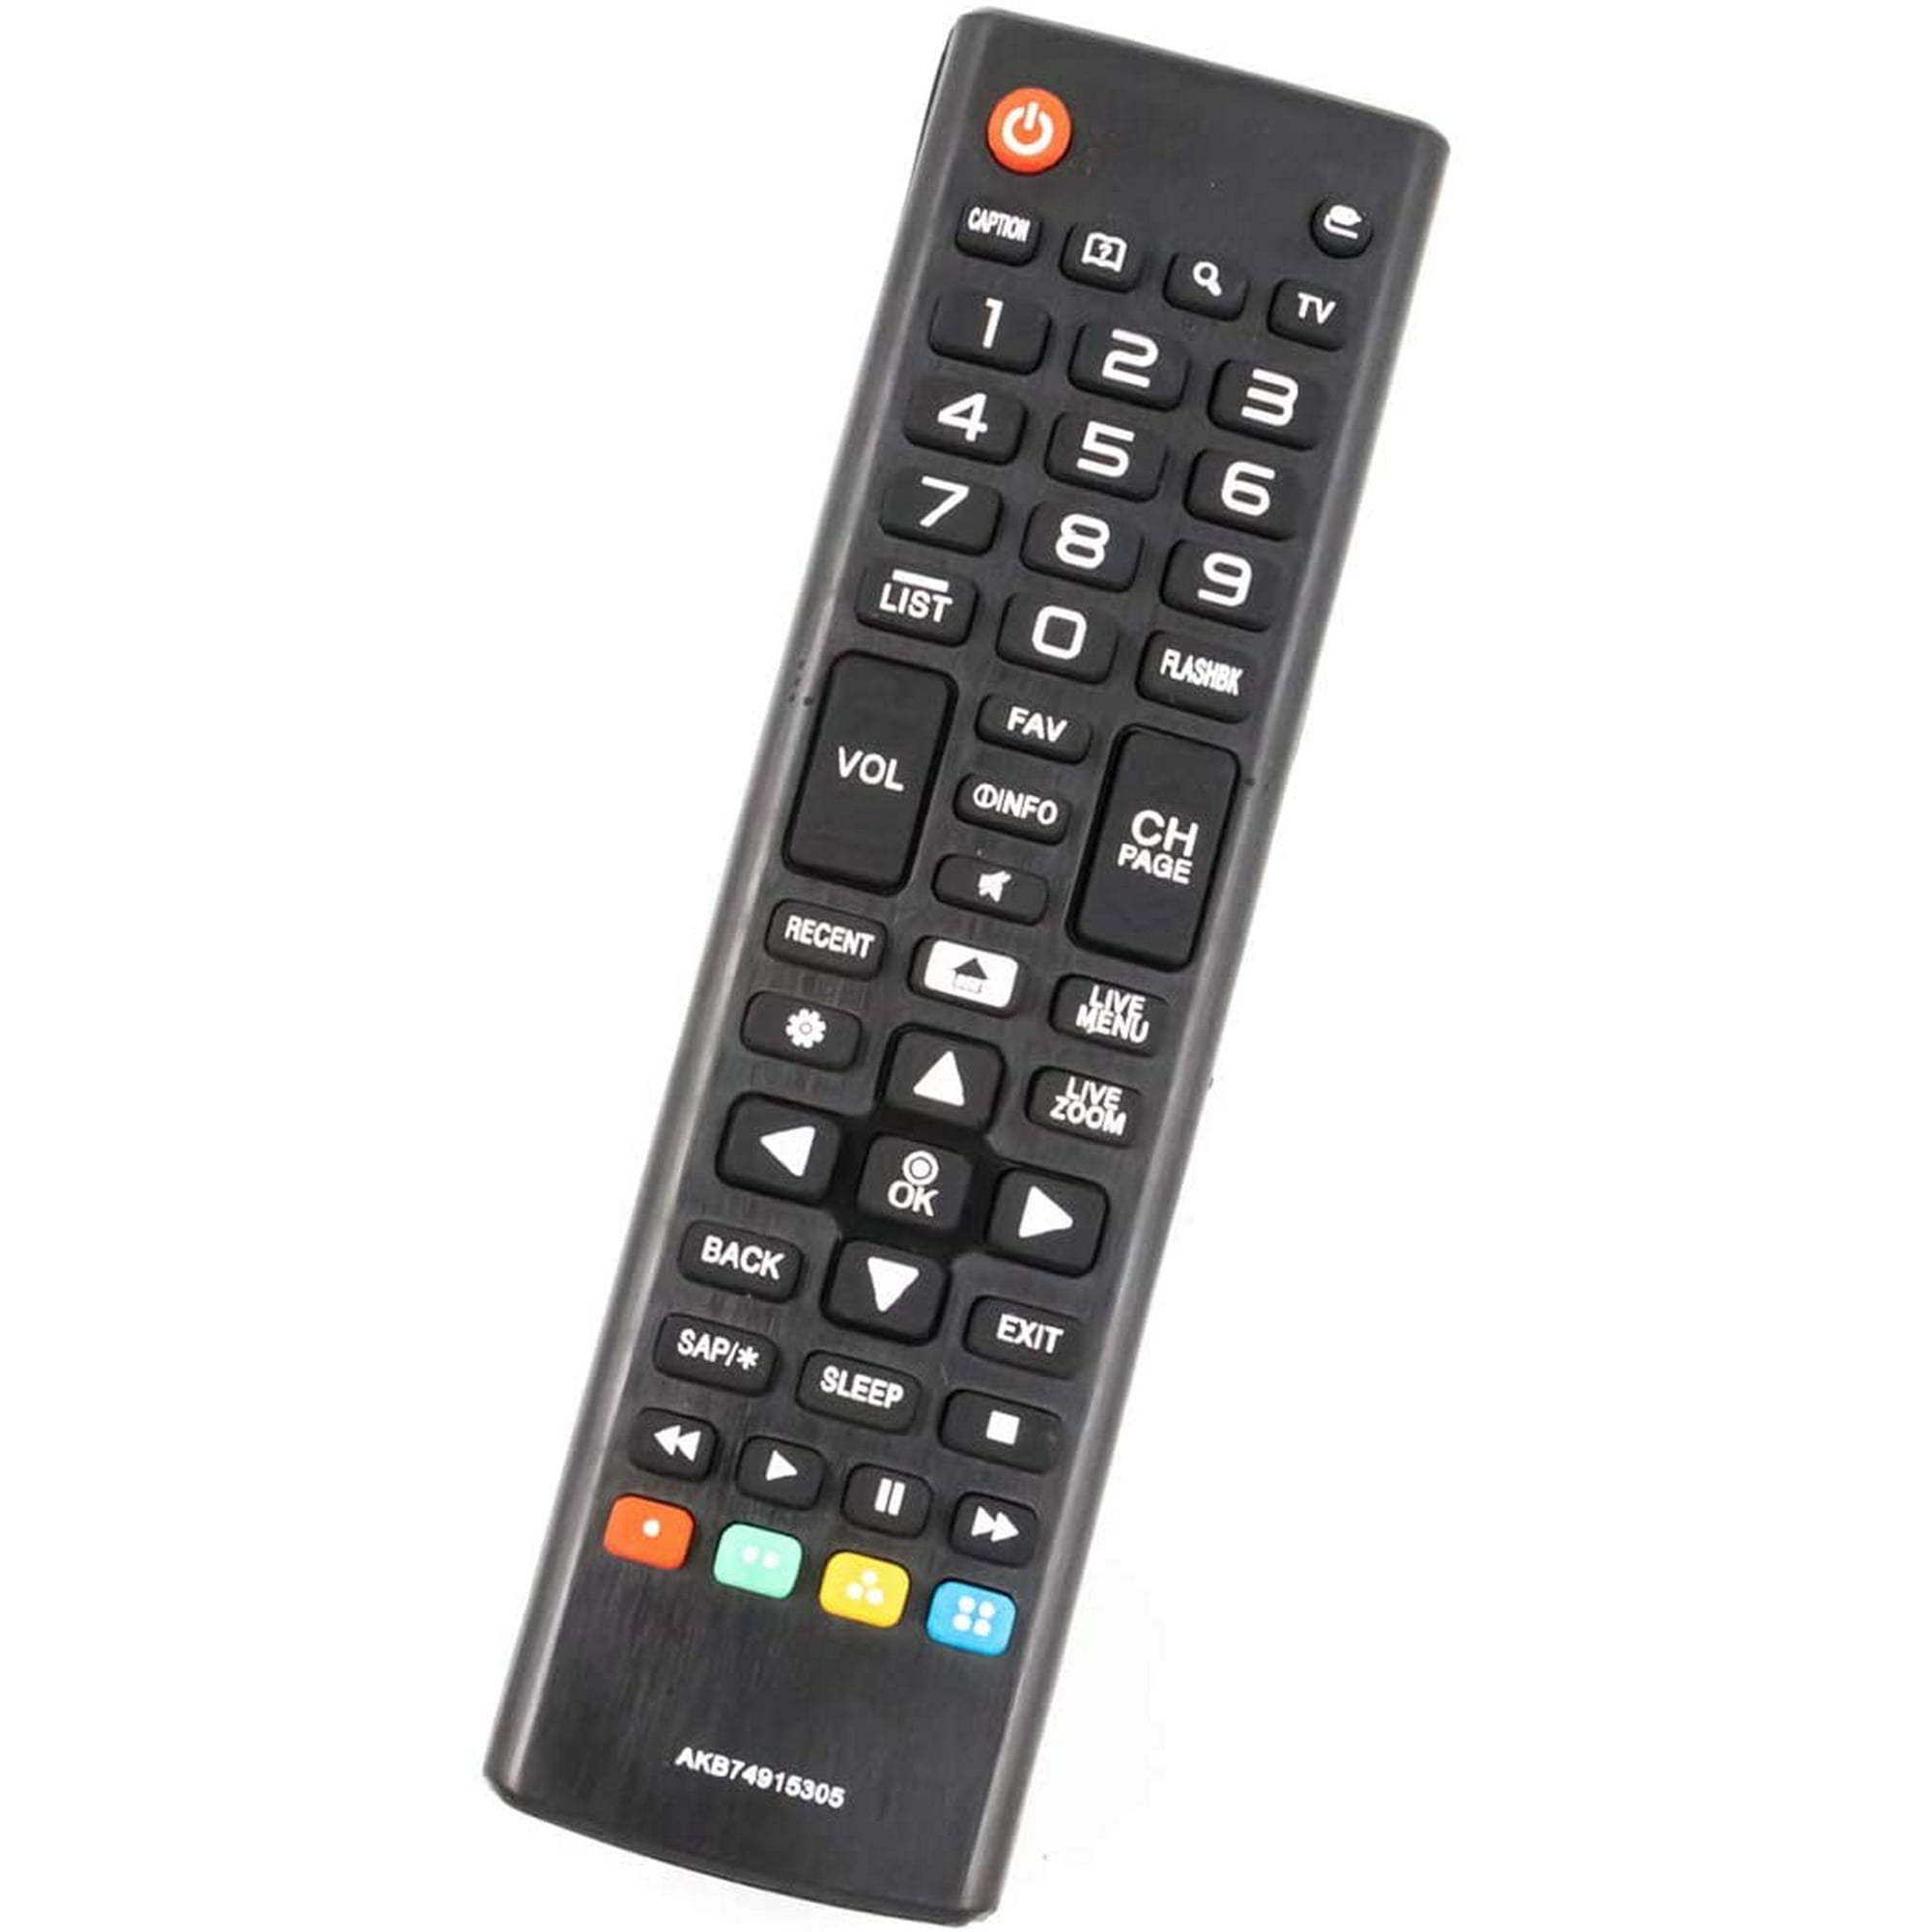 New AKB74915305 Replace Remote Control fit for LG LCD LED TV 43UJ6560  49UH6030 49UJ6560 50UH5500 50UH5530 55UH6030 55UJ6580 58UH6300 60UH7500  65UH6550 70UH6350 75UH6550 75UH8500 86UH9500 43UH6030-UB | Walmart Canada